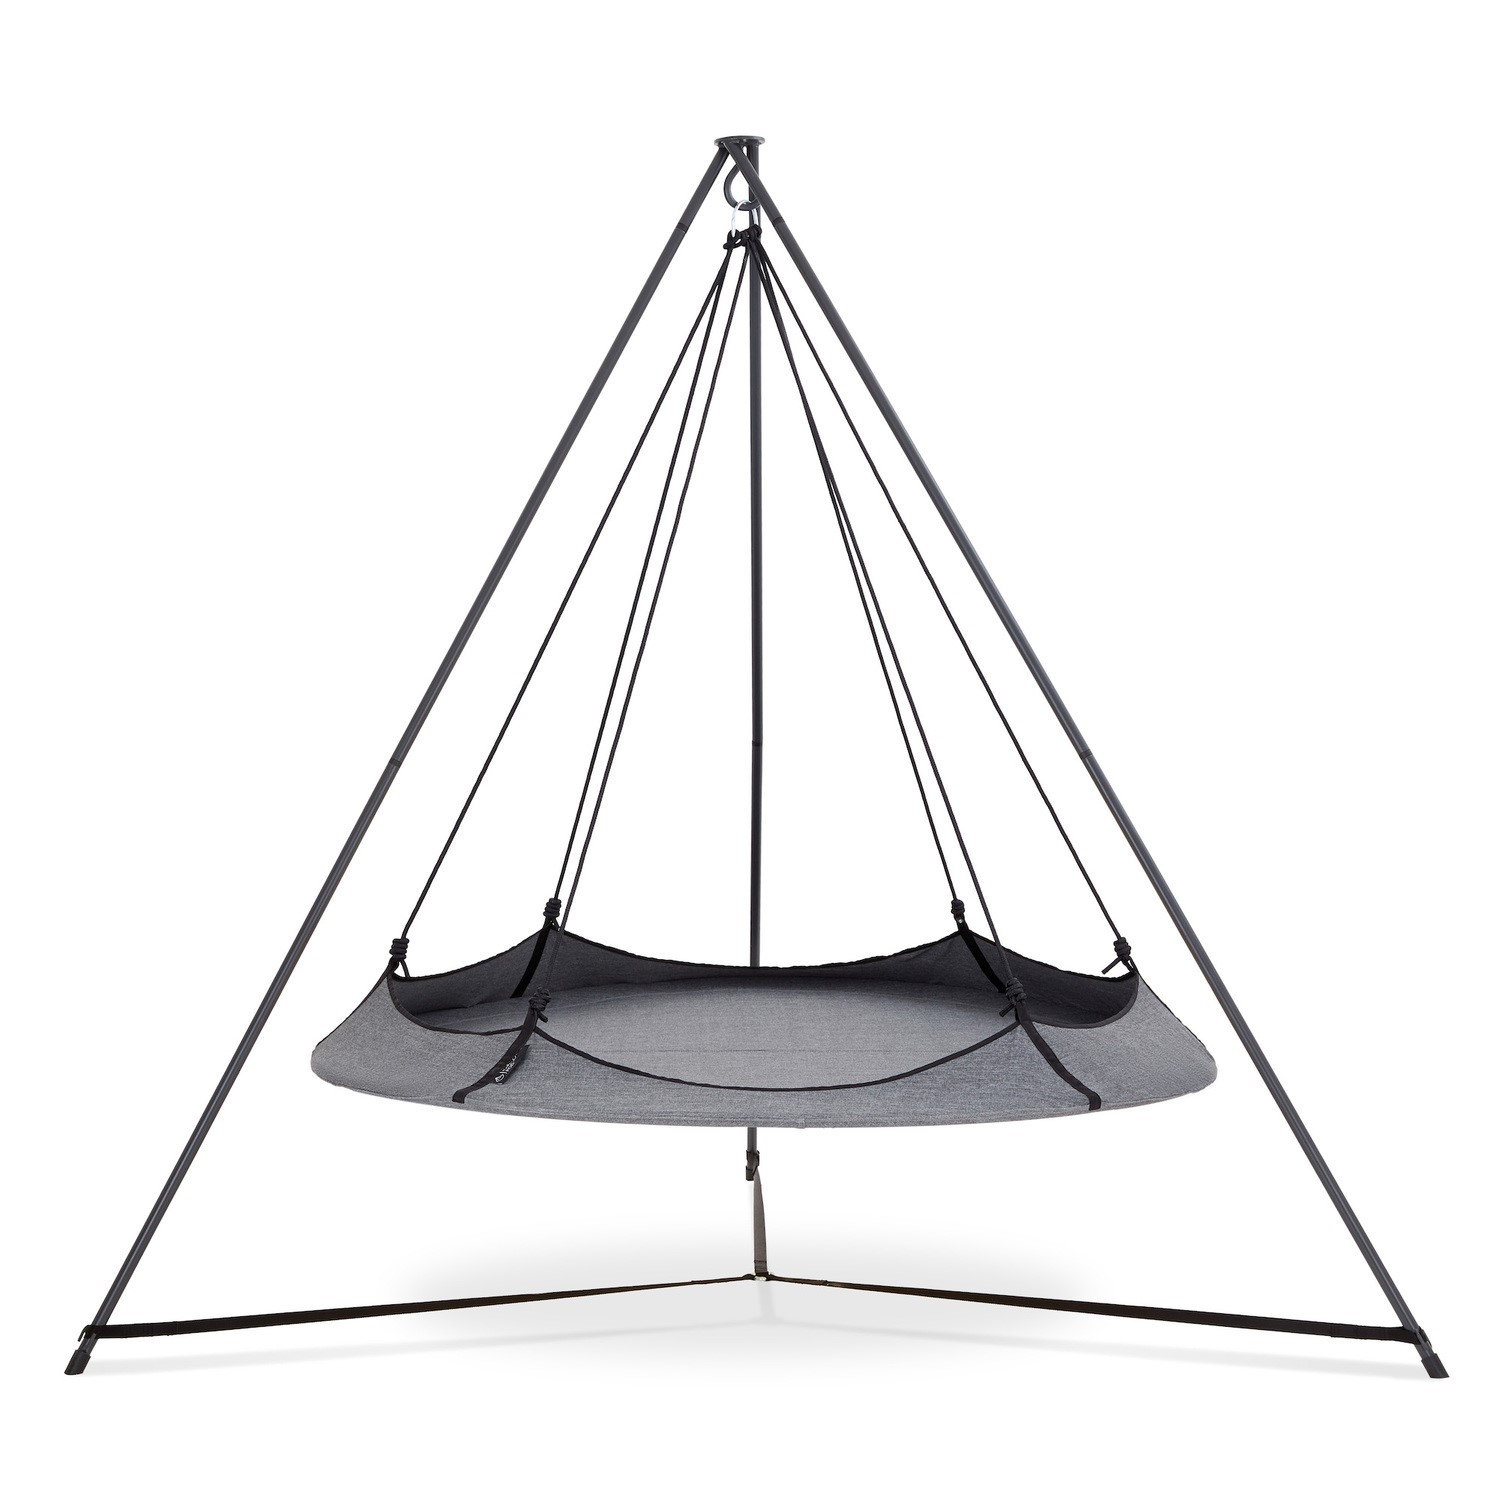 Photo of Hangout pod grey & black circular hammock bed with stand